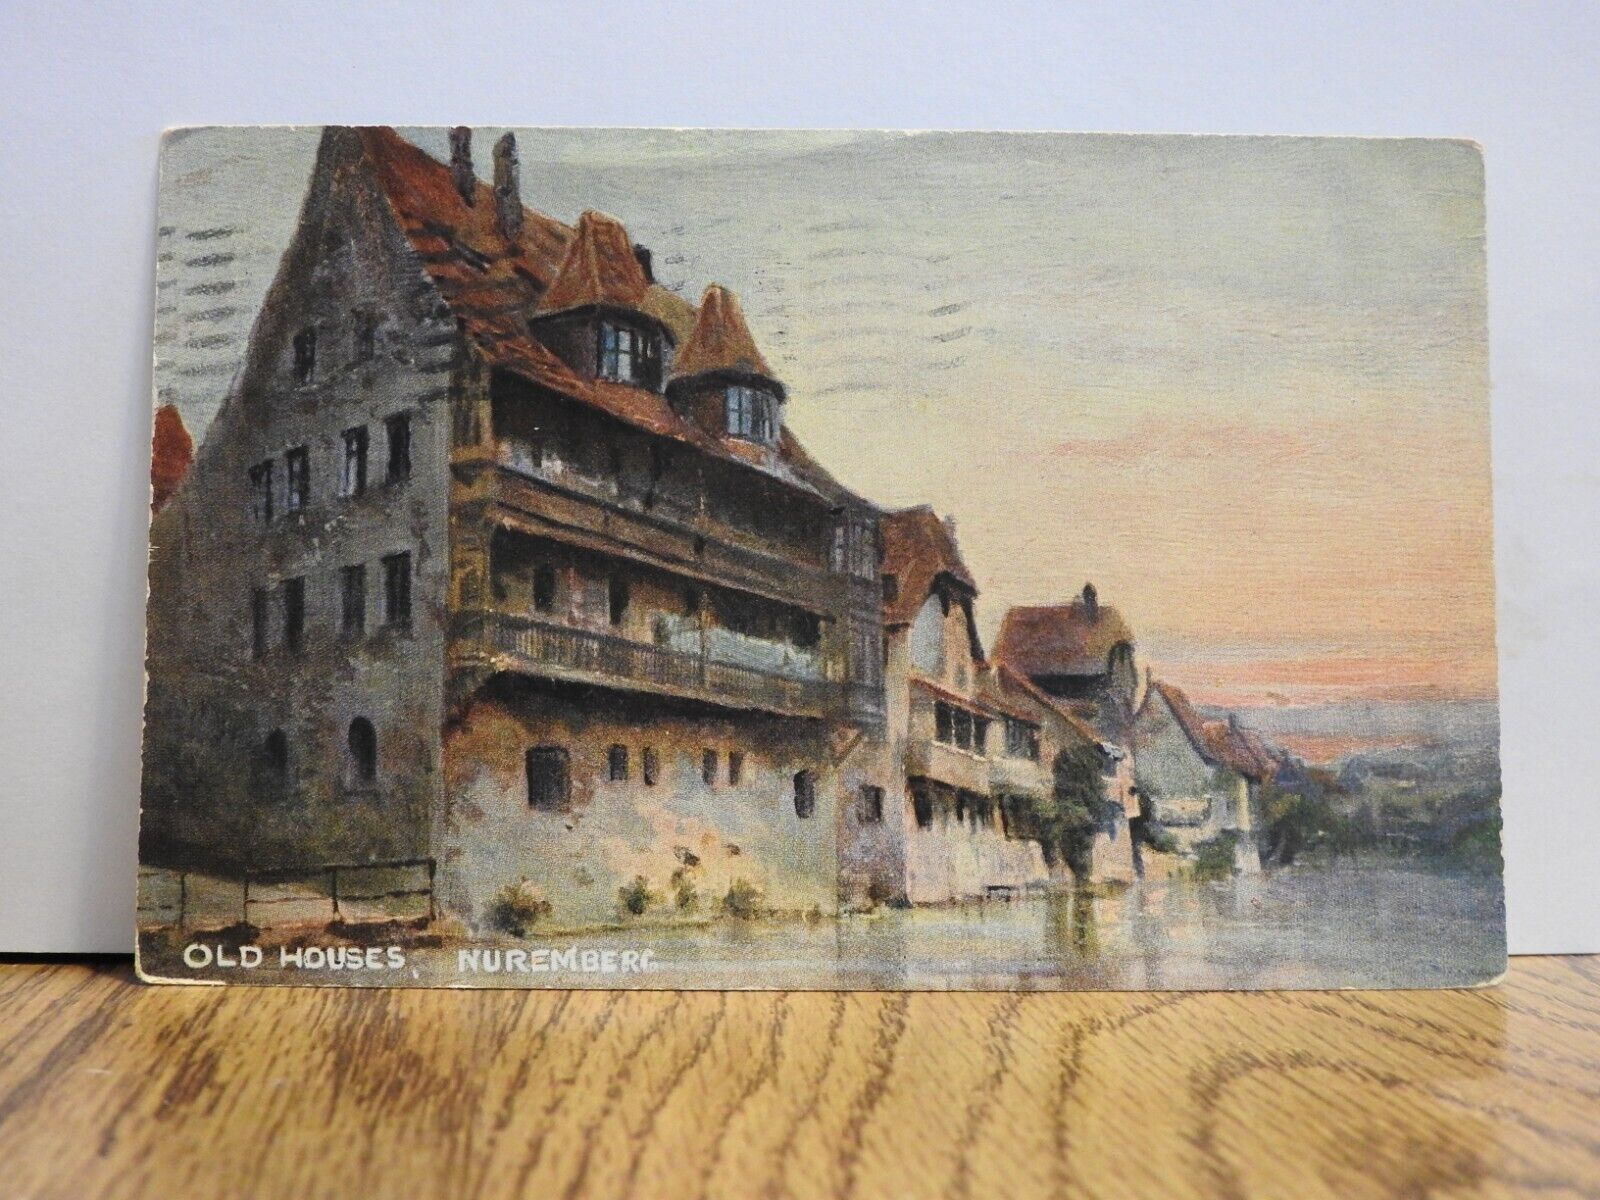 Old Houses in Nuremberg, Germany Posted 1906 Lithograph Postcard A284